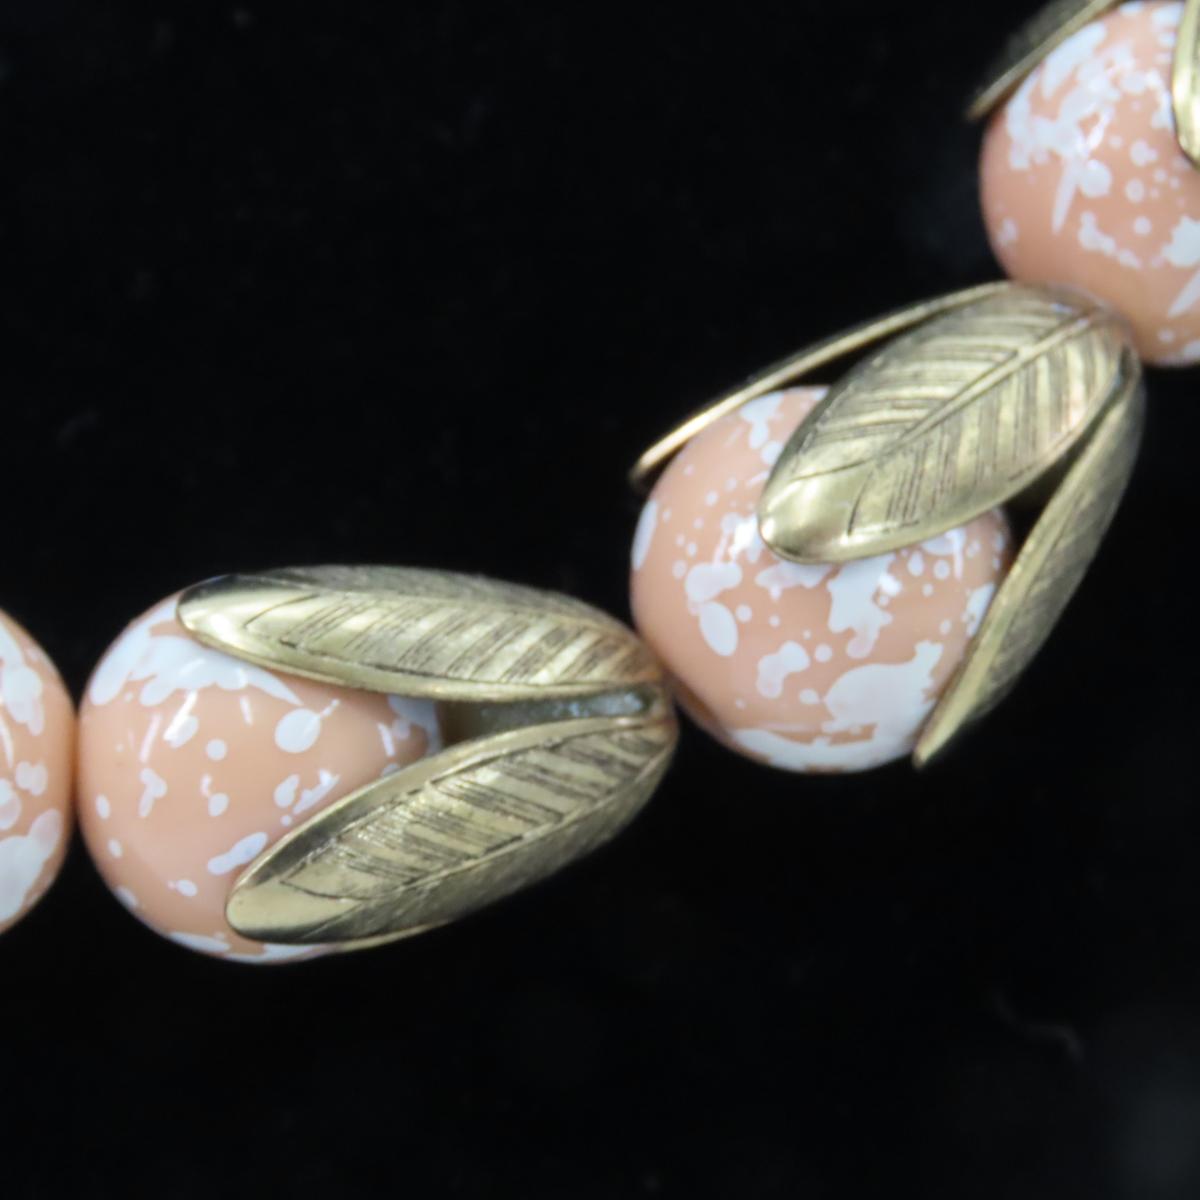 Lenora Dame, Charter Club & Other Vintage Jewelry